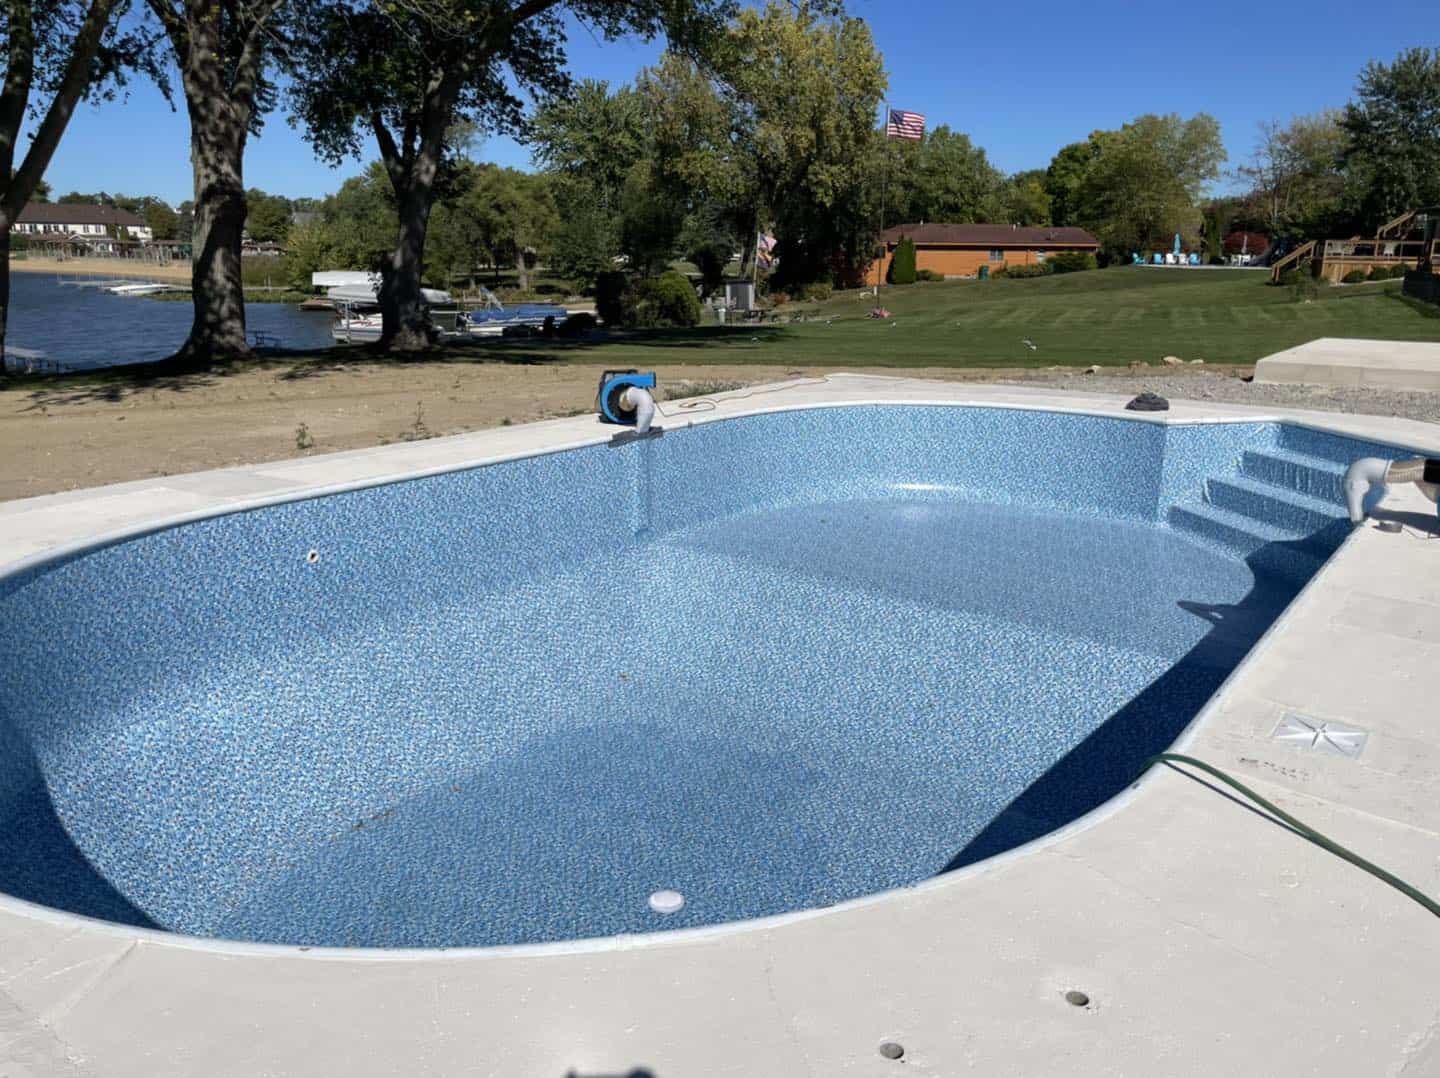 A swimming pool is being installed in a backyard.